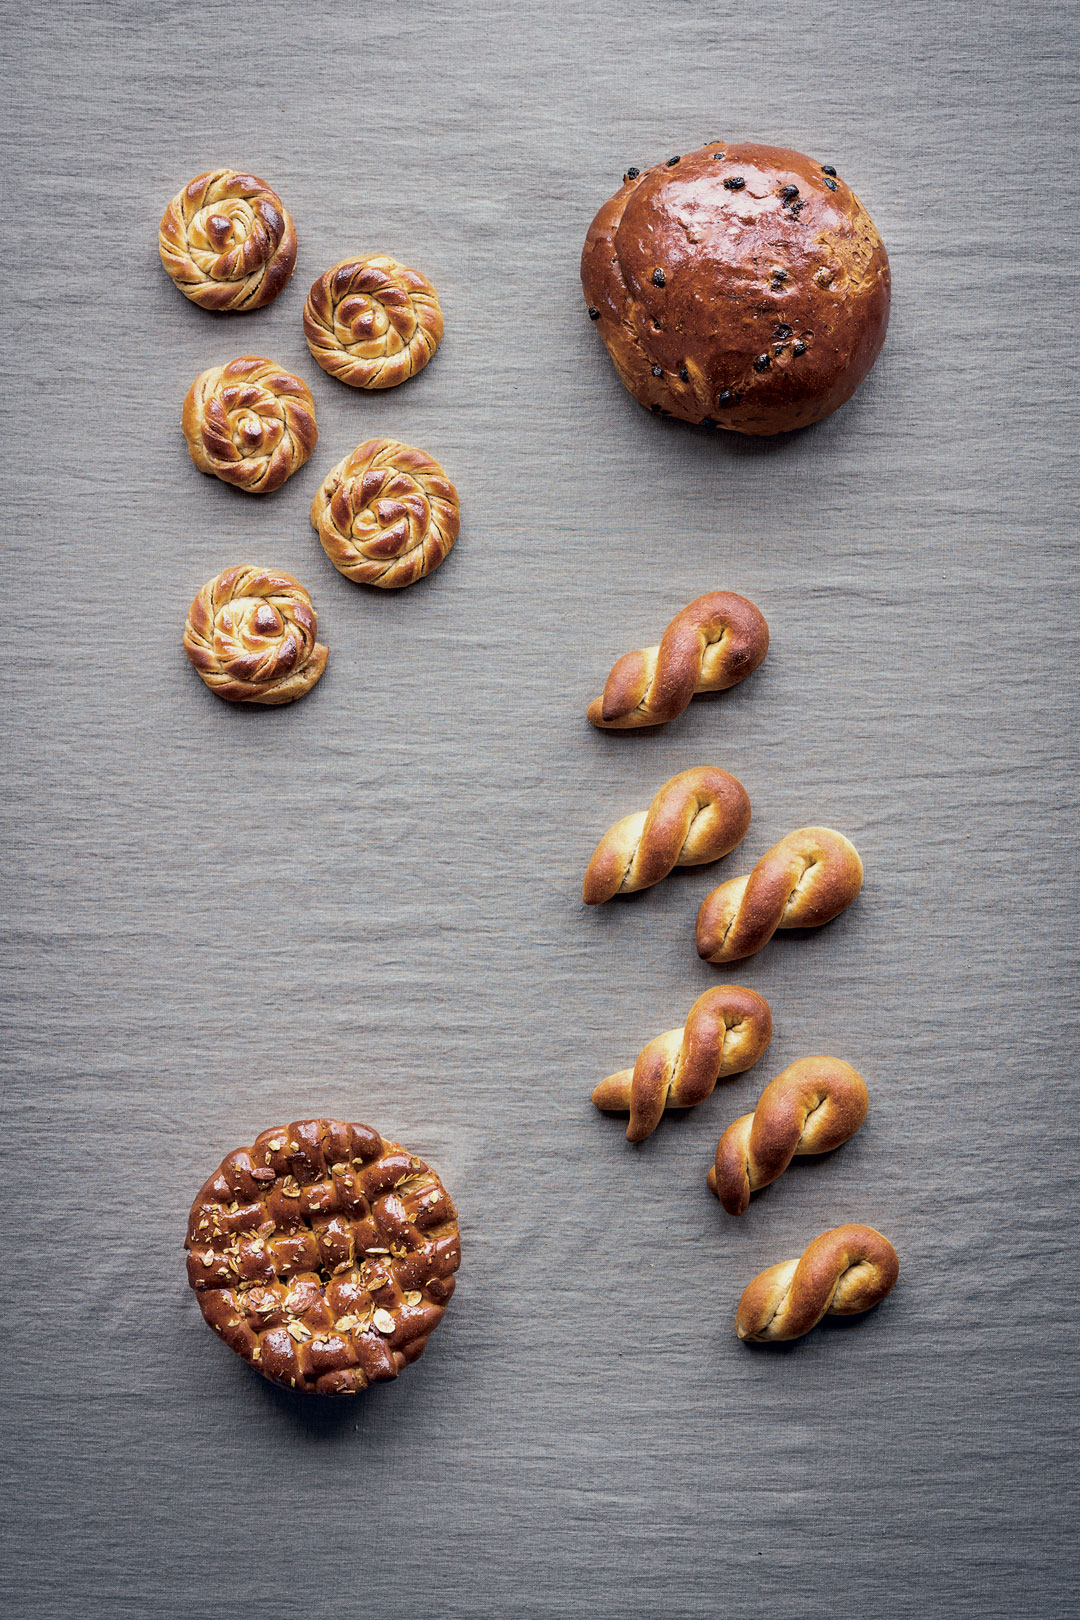 Clockwise from top left: Karlsbader Buns with Almond Paste Filling; Norwegian Christmas Bread; Boys; Danish Almond Tart Leavened with Yeast. All images by Magnus Nilsson from The Nordic Baking Book